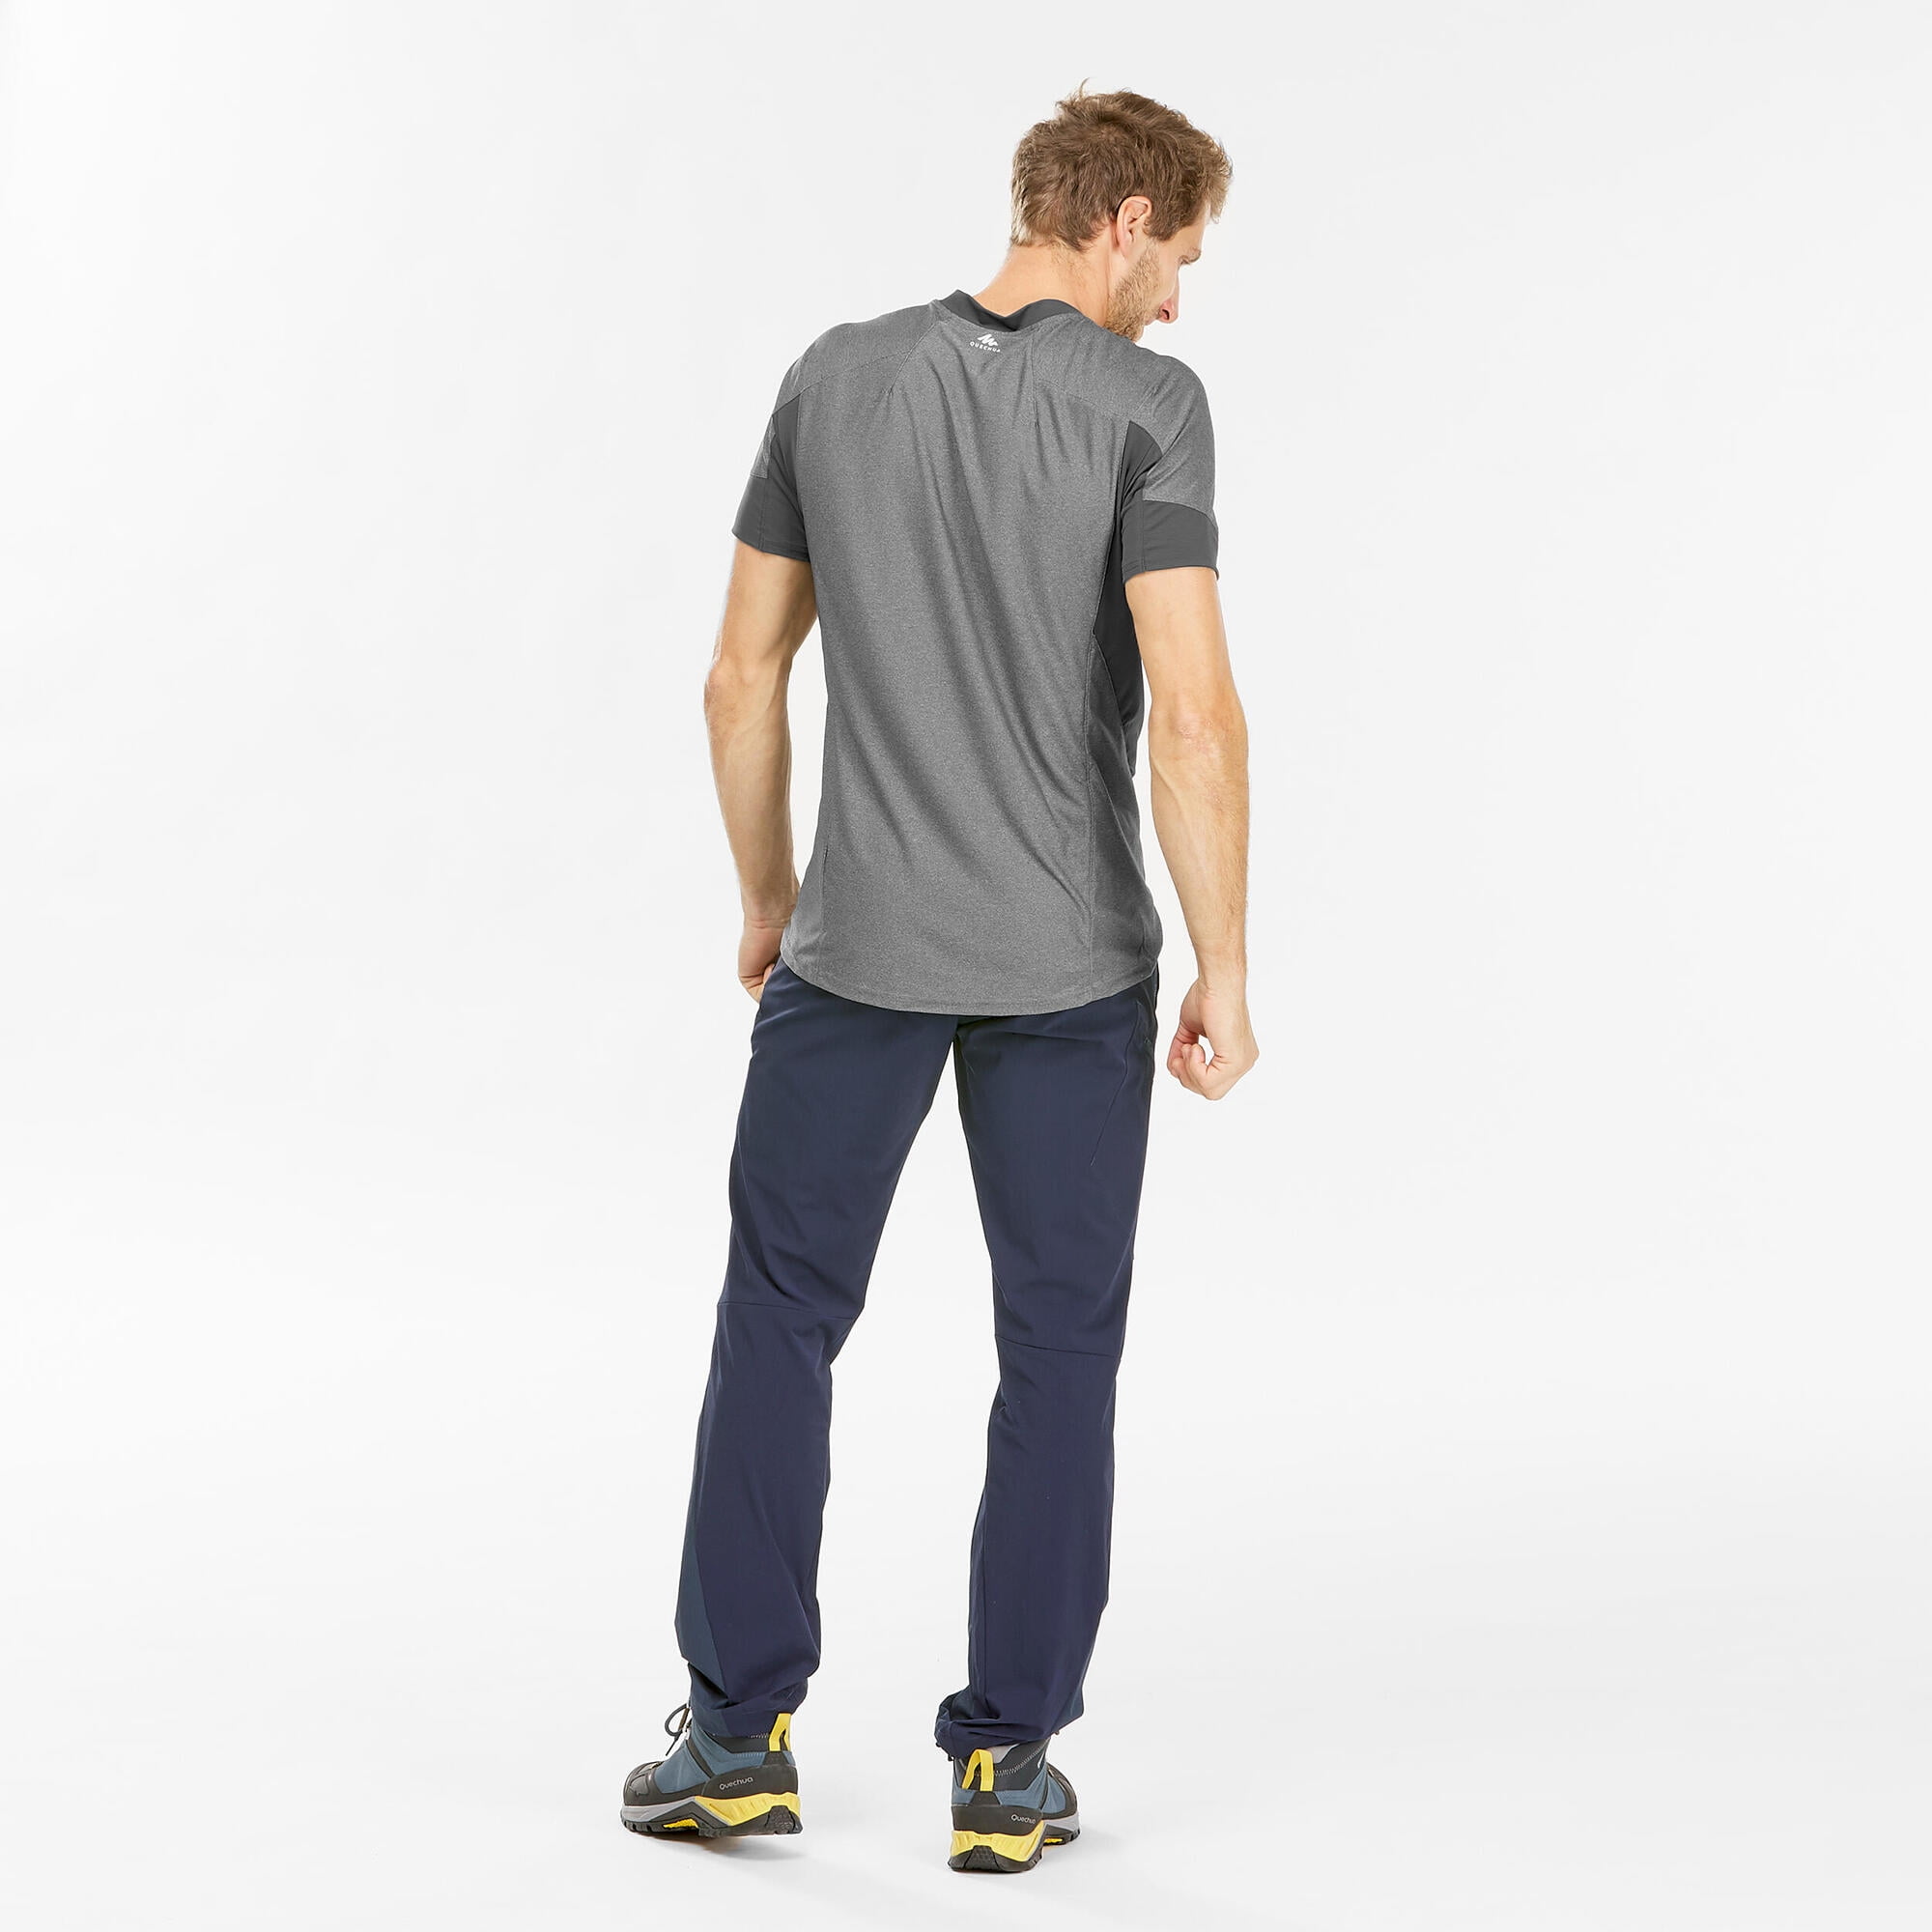 Discover more than 167 decathlon men’s track pants latest